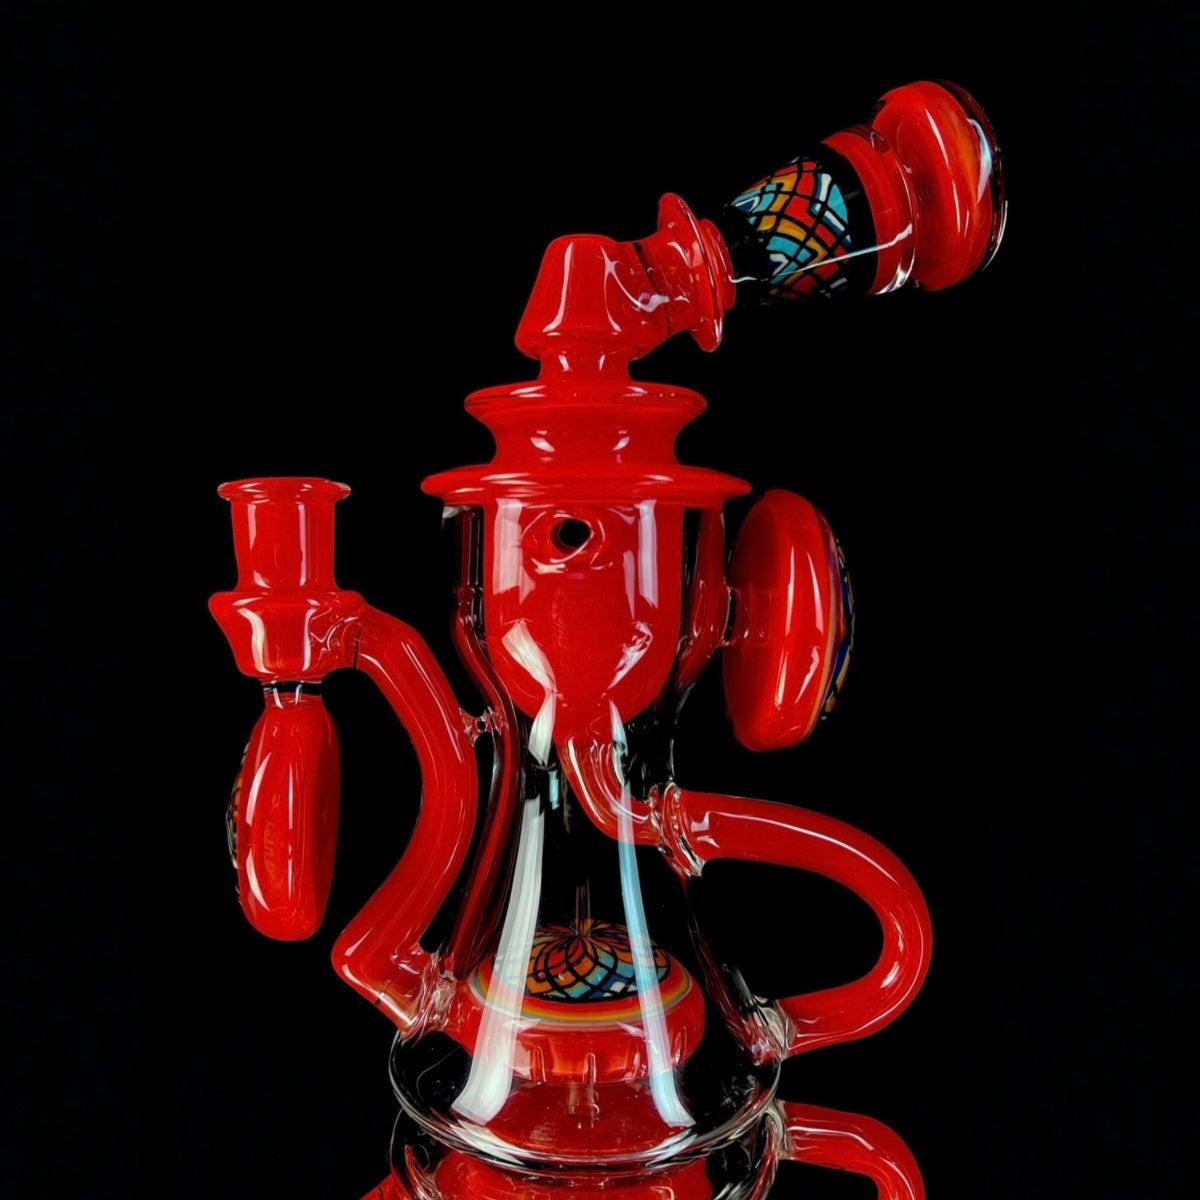 “Kiss the Filla” by Distortion Glass